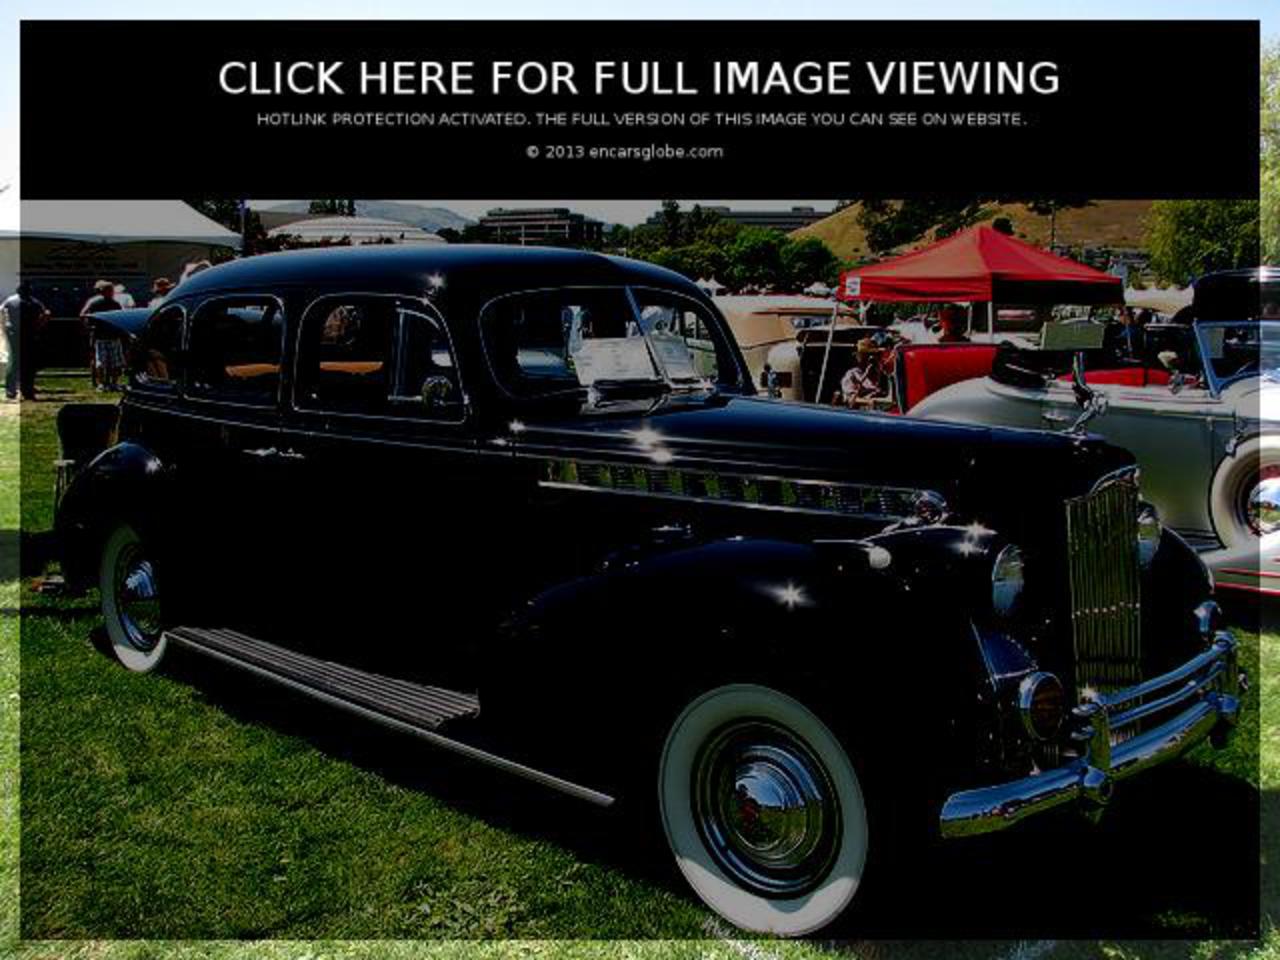 Packard Sedan 160 Photo Gallery: Photo #12 out of 4, Image Size ...